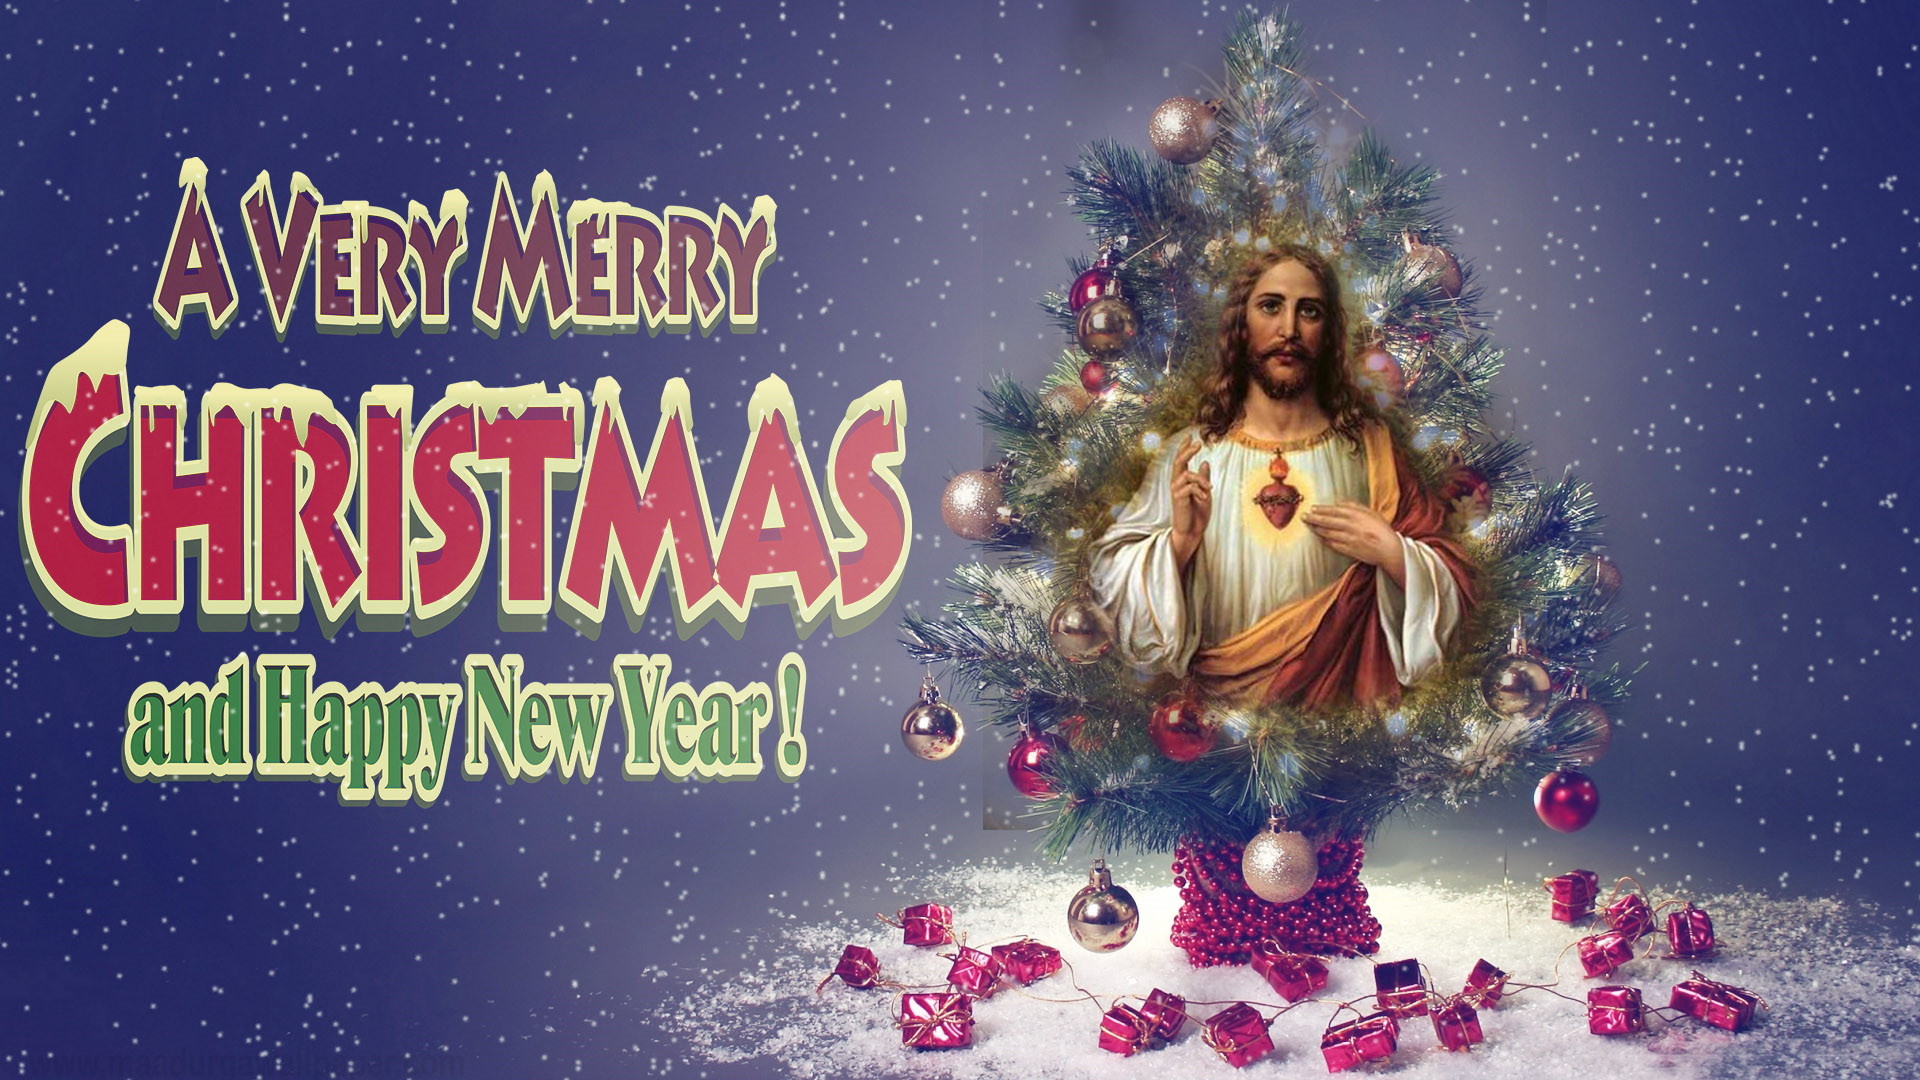 Baby Jesus Christmas wallpaper, beautiful photo hd images download free for tablet, desktop